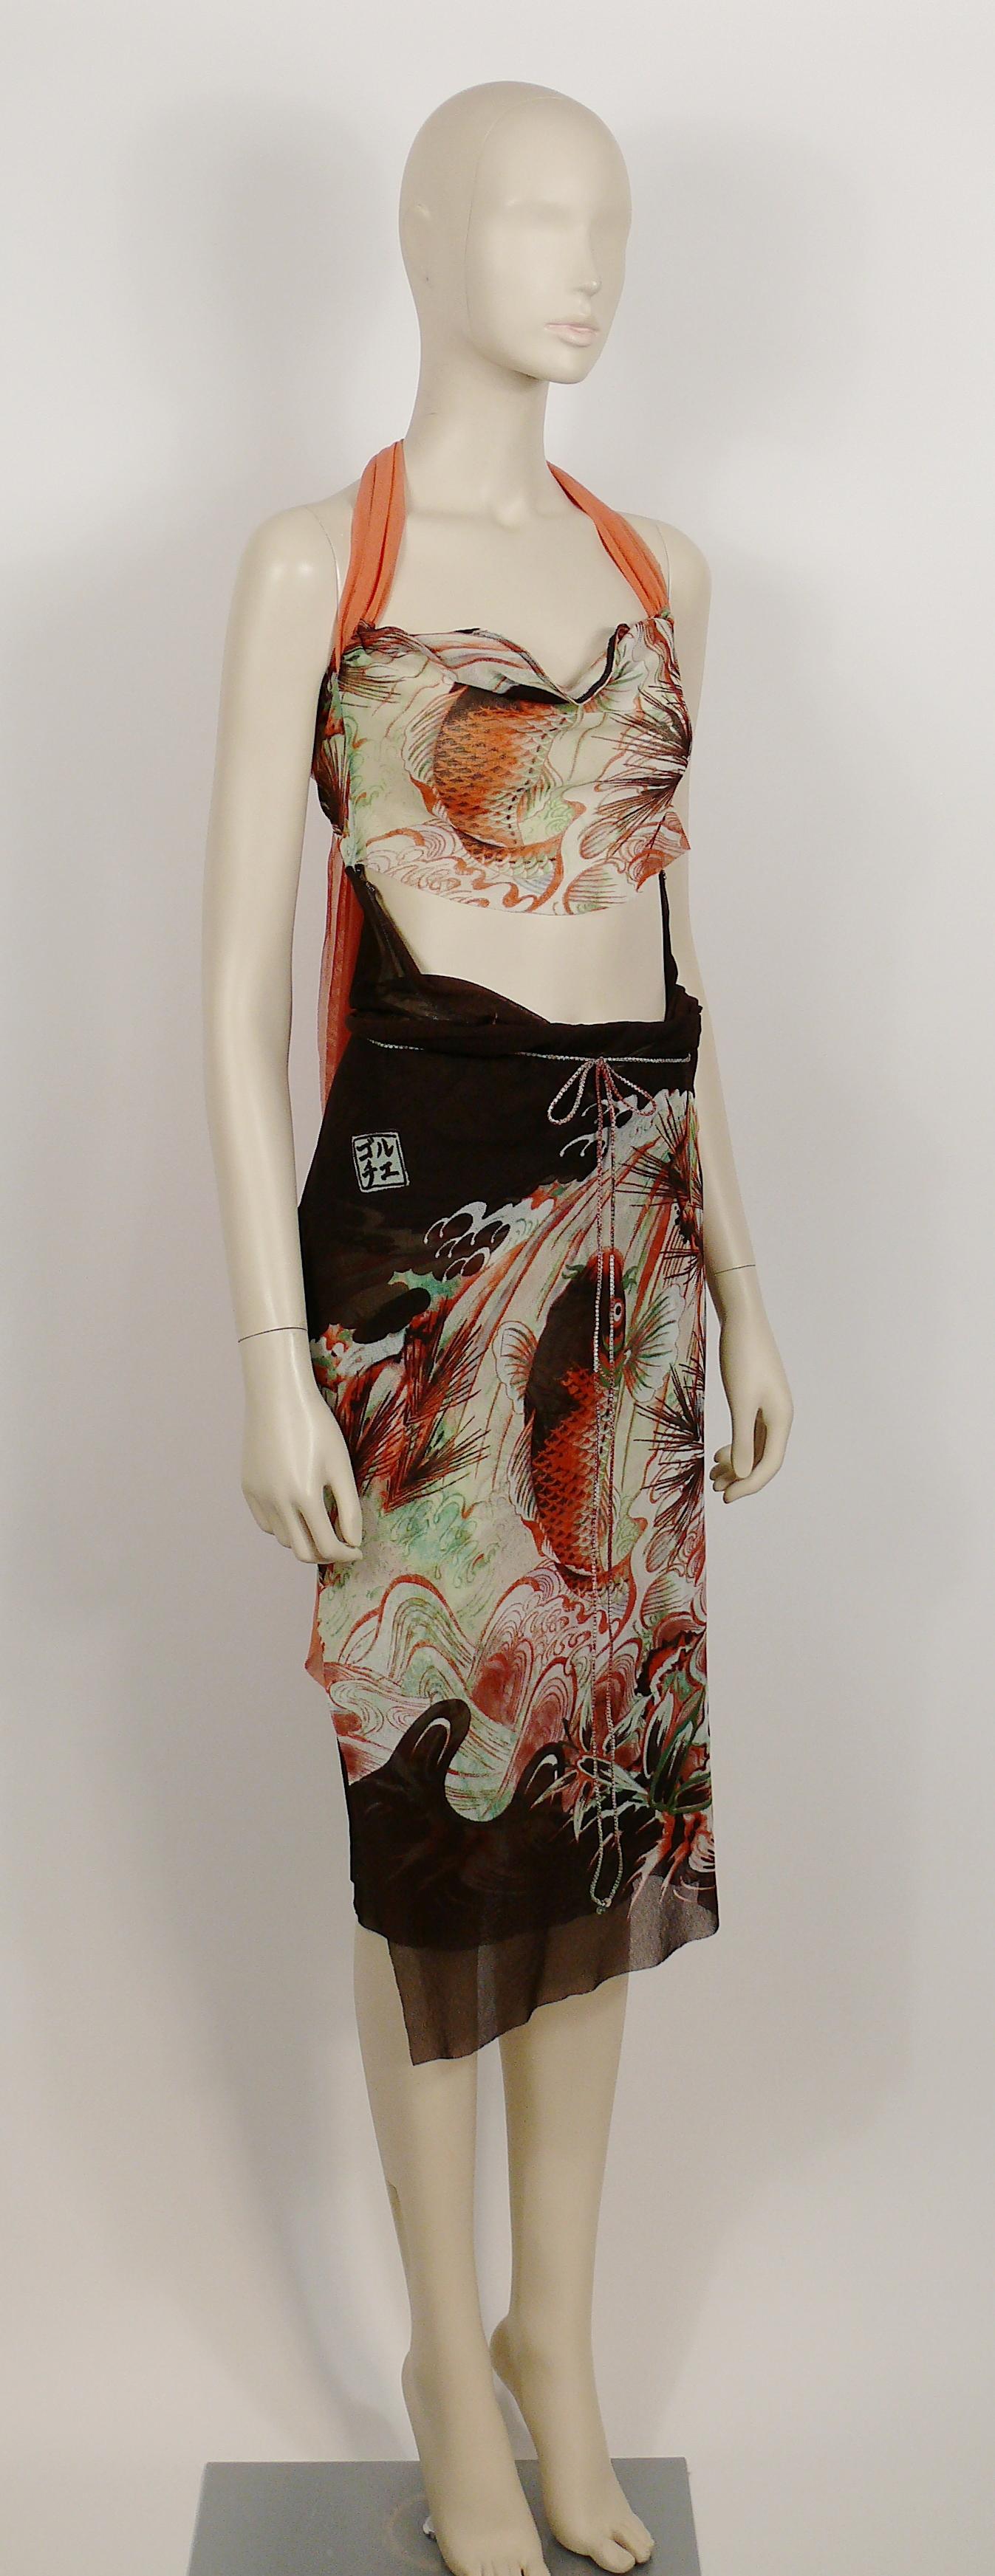 JEAN PAUL GAULTIER vintage koi fish tattoo sheer mesh Summer beach dress.

The bustier top ties with long orange straps around the neck, back or front...
The skirt part wraps around with spaghetti straps.

Label reads JEAN PAUL GAULTIER SOLEIL.
Made